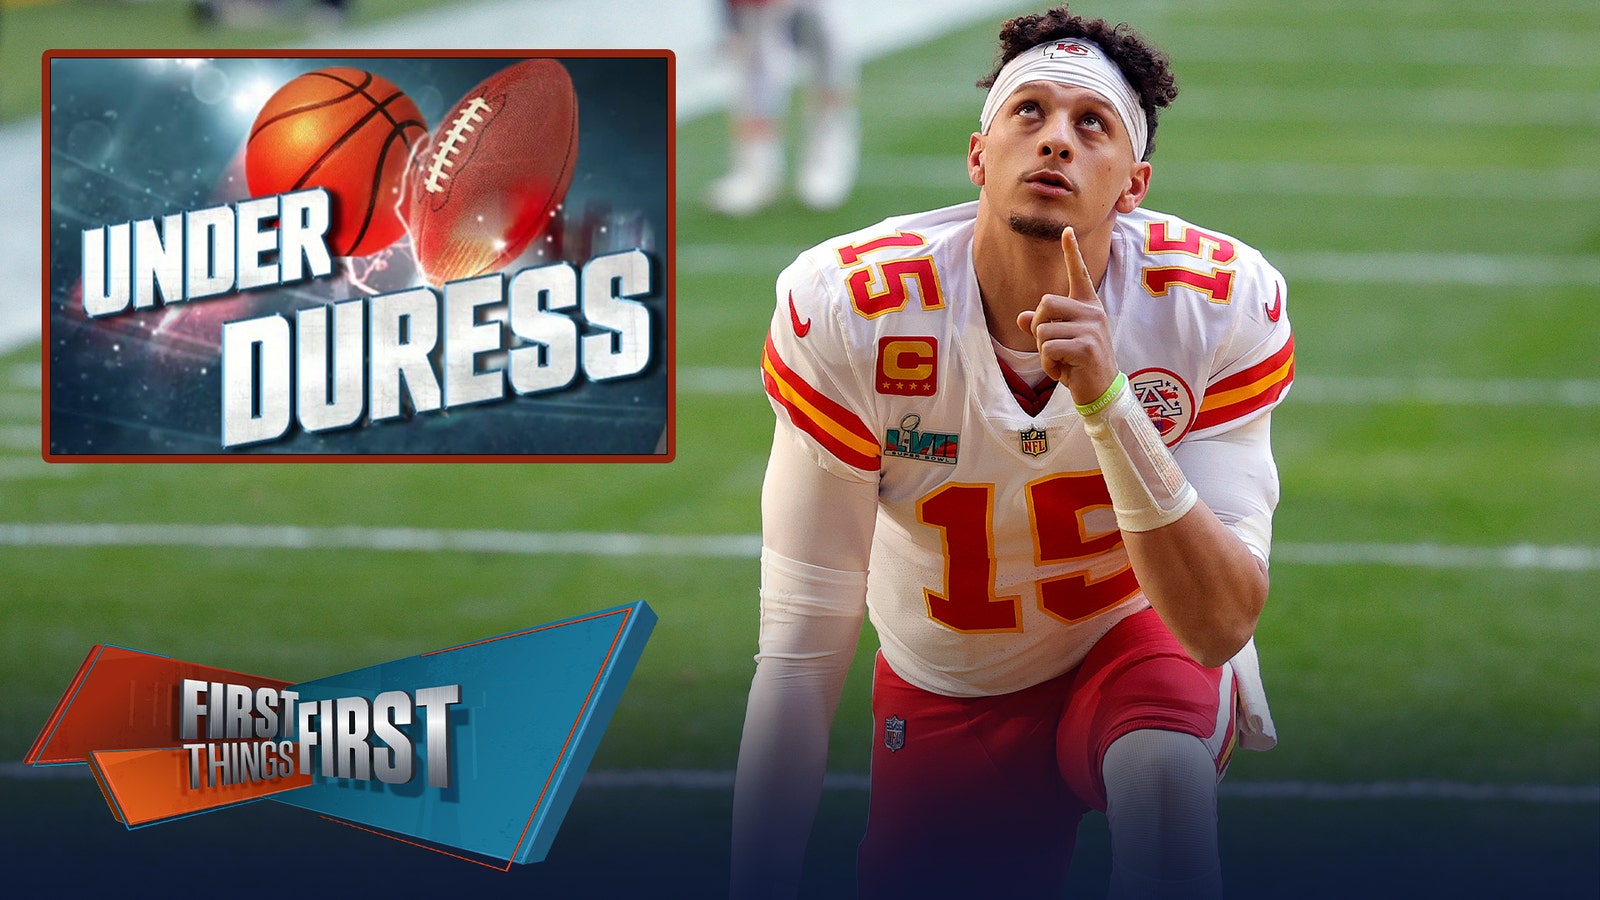 Patrick Mahomes, Brock Purdy are ‘Under Duress’ ahead of Super Bowl LVIII